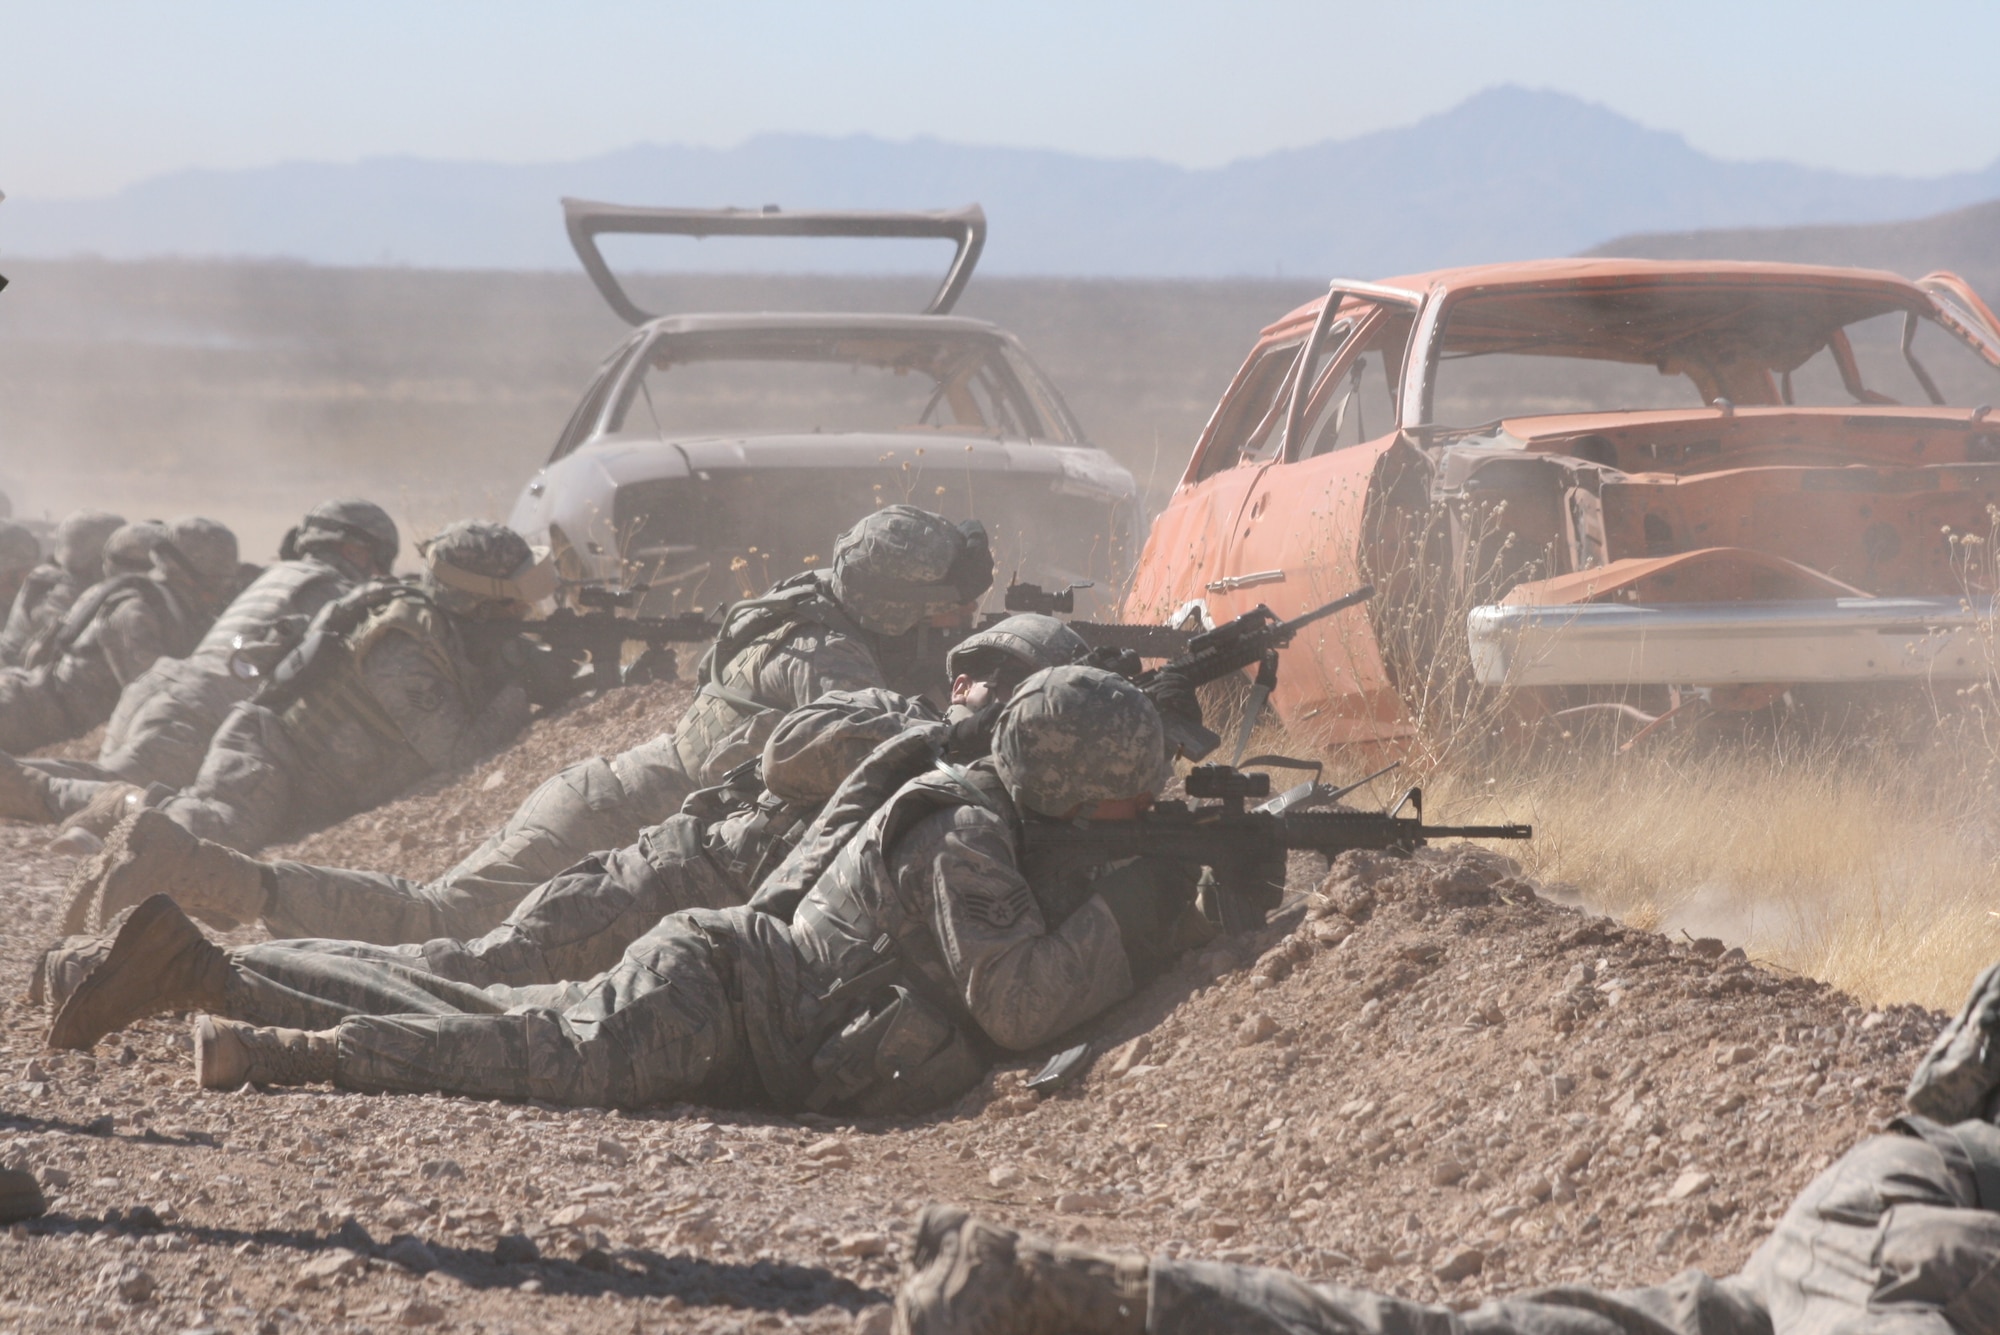 Airmen from the 376th Expeditionary Security Forces Squadron fire at multiple targets in the prone firing position during a convoy live fire exercise at McGregor Range, N.M.  Photo by Maj. Deanna Bague, Fort Bliss Public Affairs Office